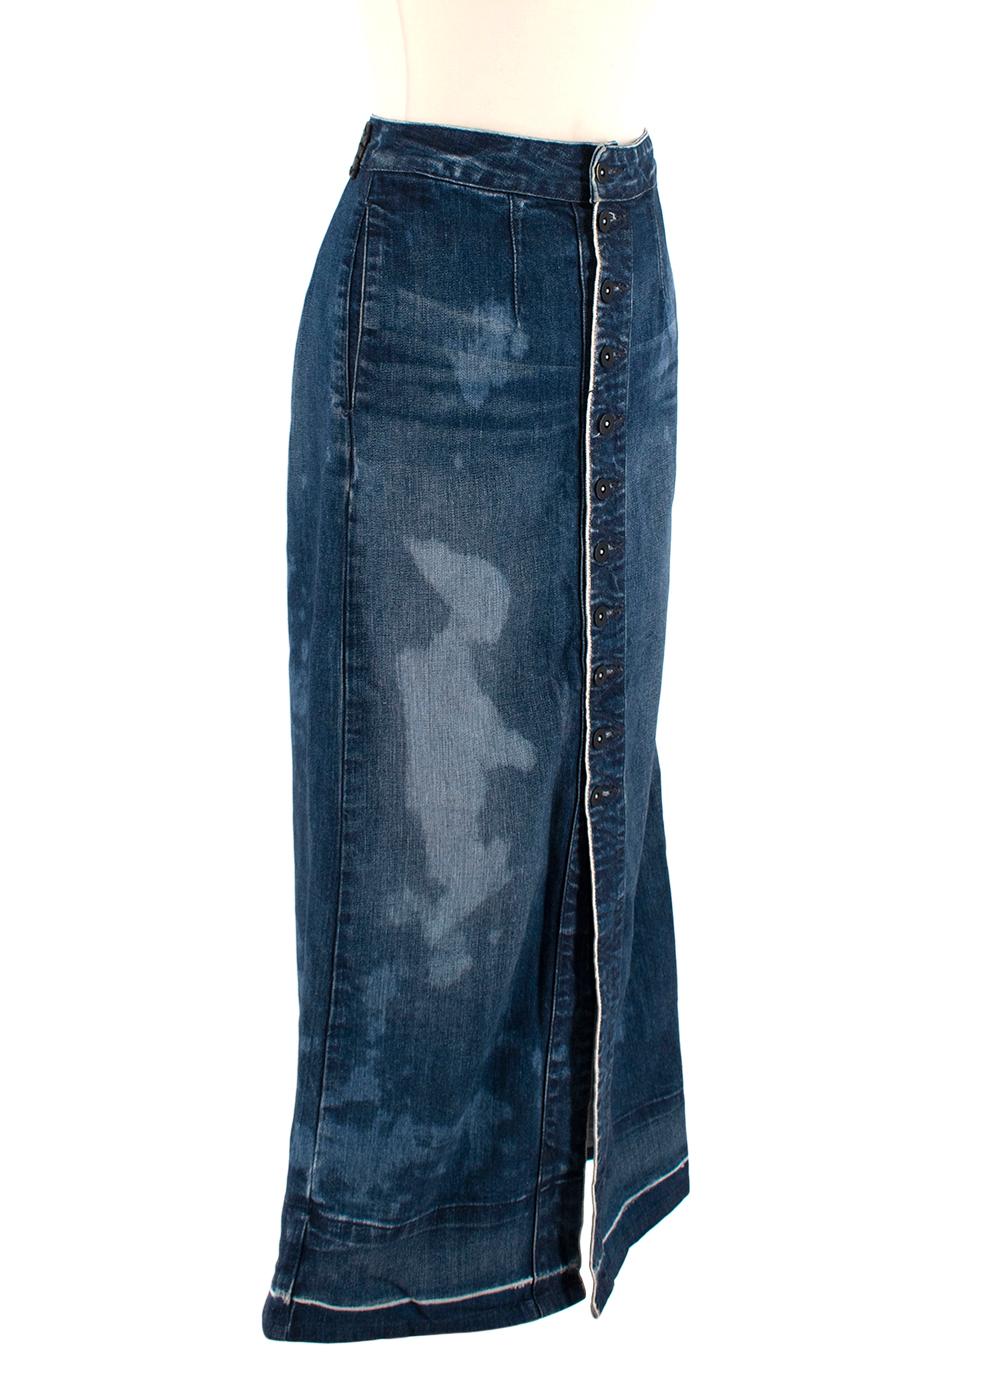 Tortoise Taylori Denim Button-Up Water Stain Design Maxi Skirt

- Water-stained and dyed with sea salt to achieve a truly authentic, vintage aesthetic
- Matte black buttons through its front
- Extended let-out hem
- High-waisted silhouette
- Two